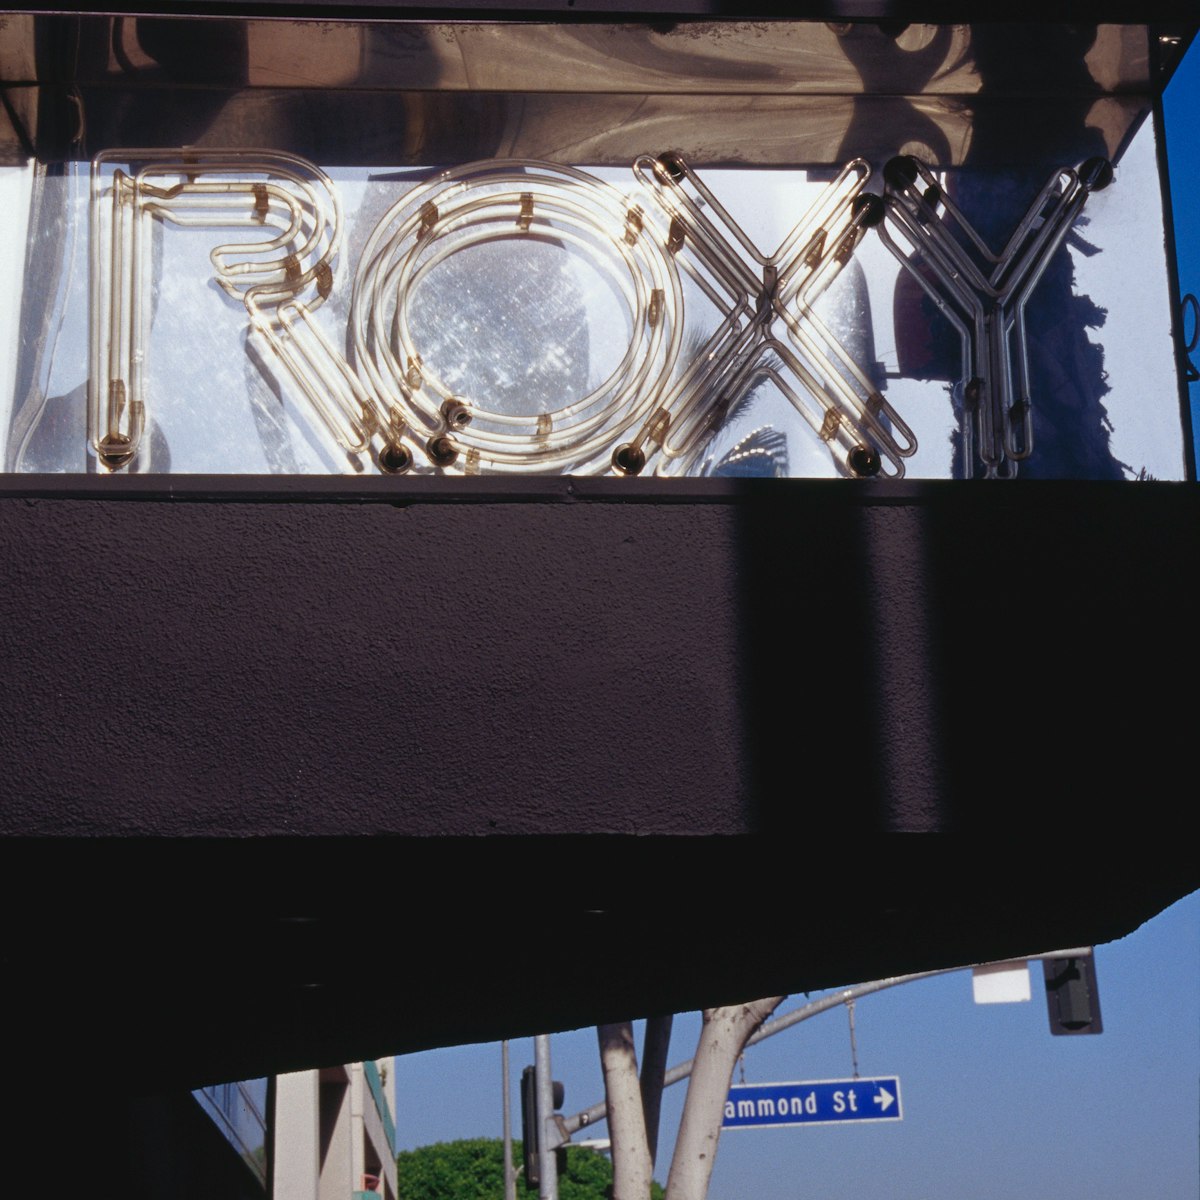 Sign for Roxy music club, Hollywood.